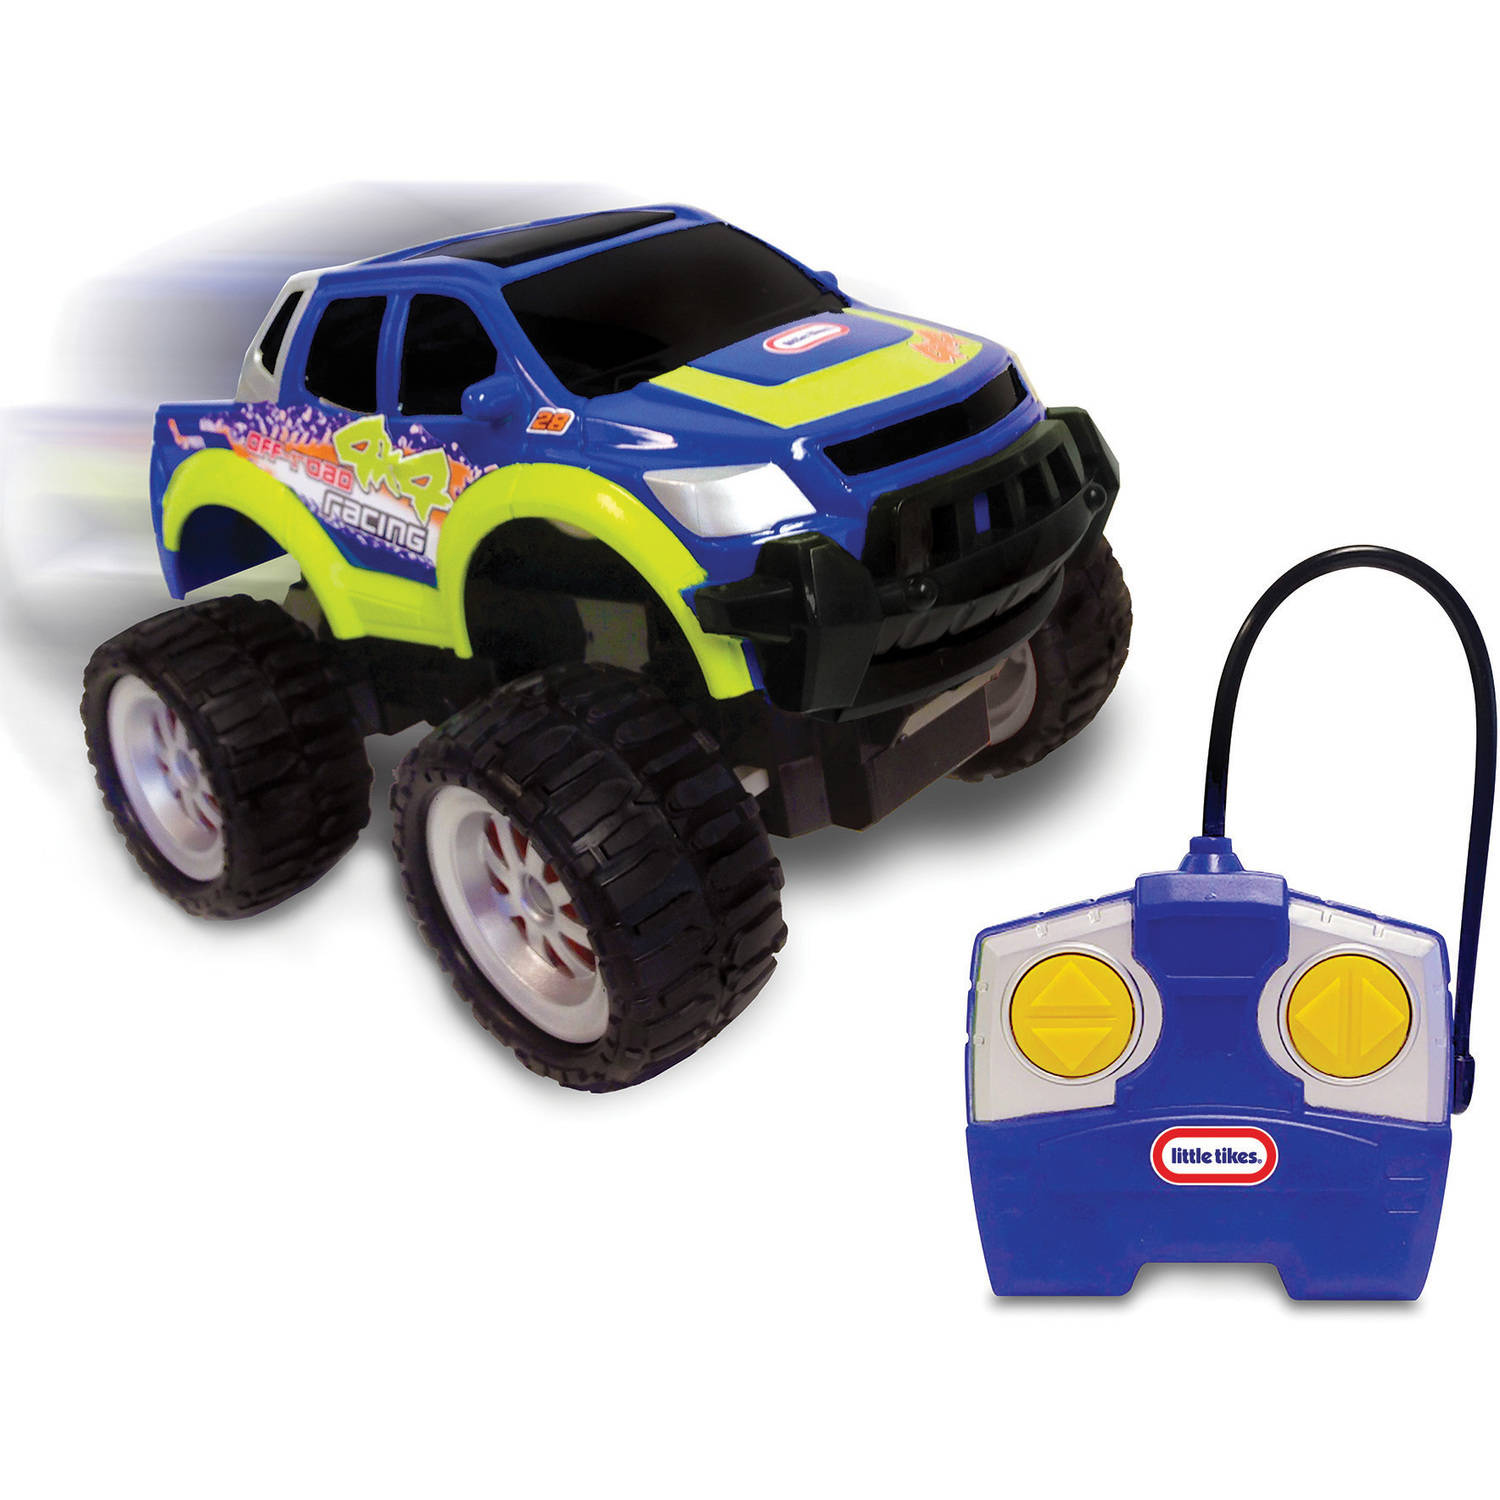 Little Tikes RC Wheelz First Racers Radio Controlled Truck - image 2 of 2